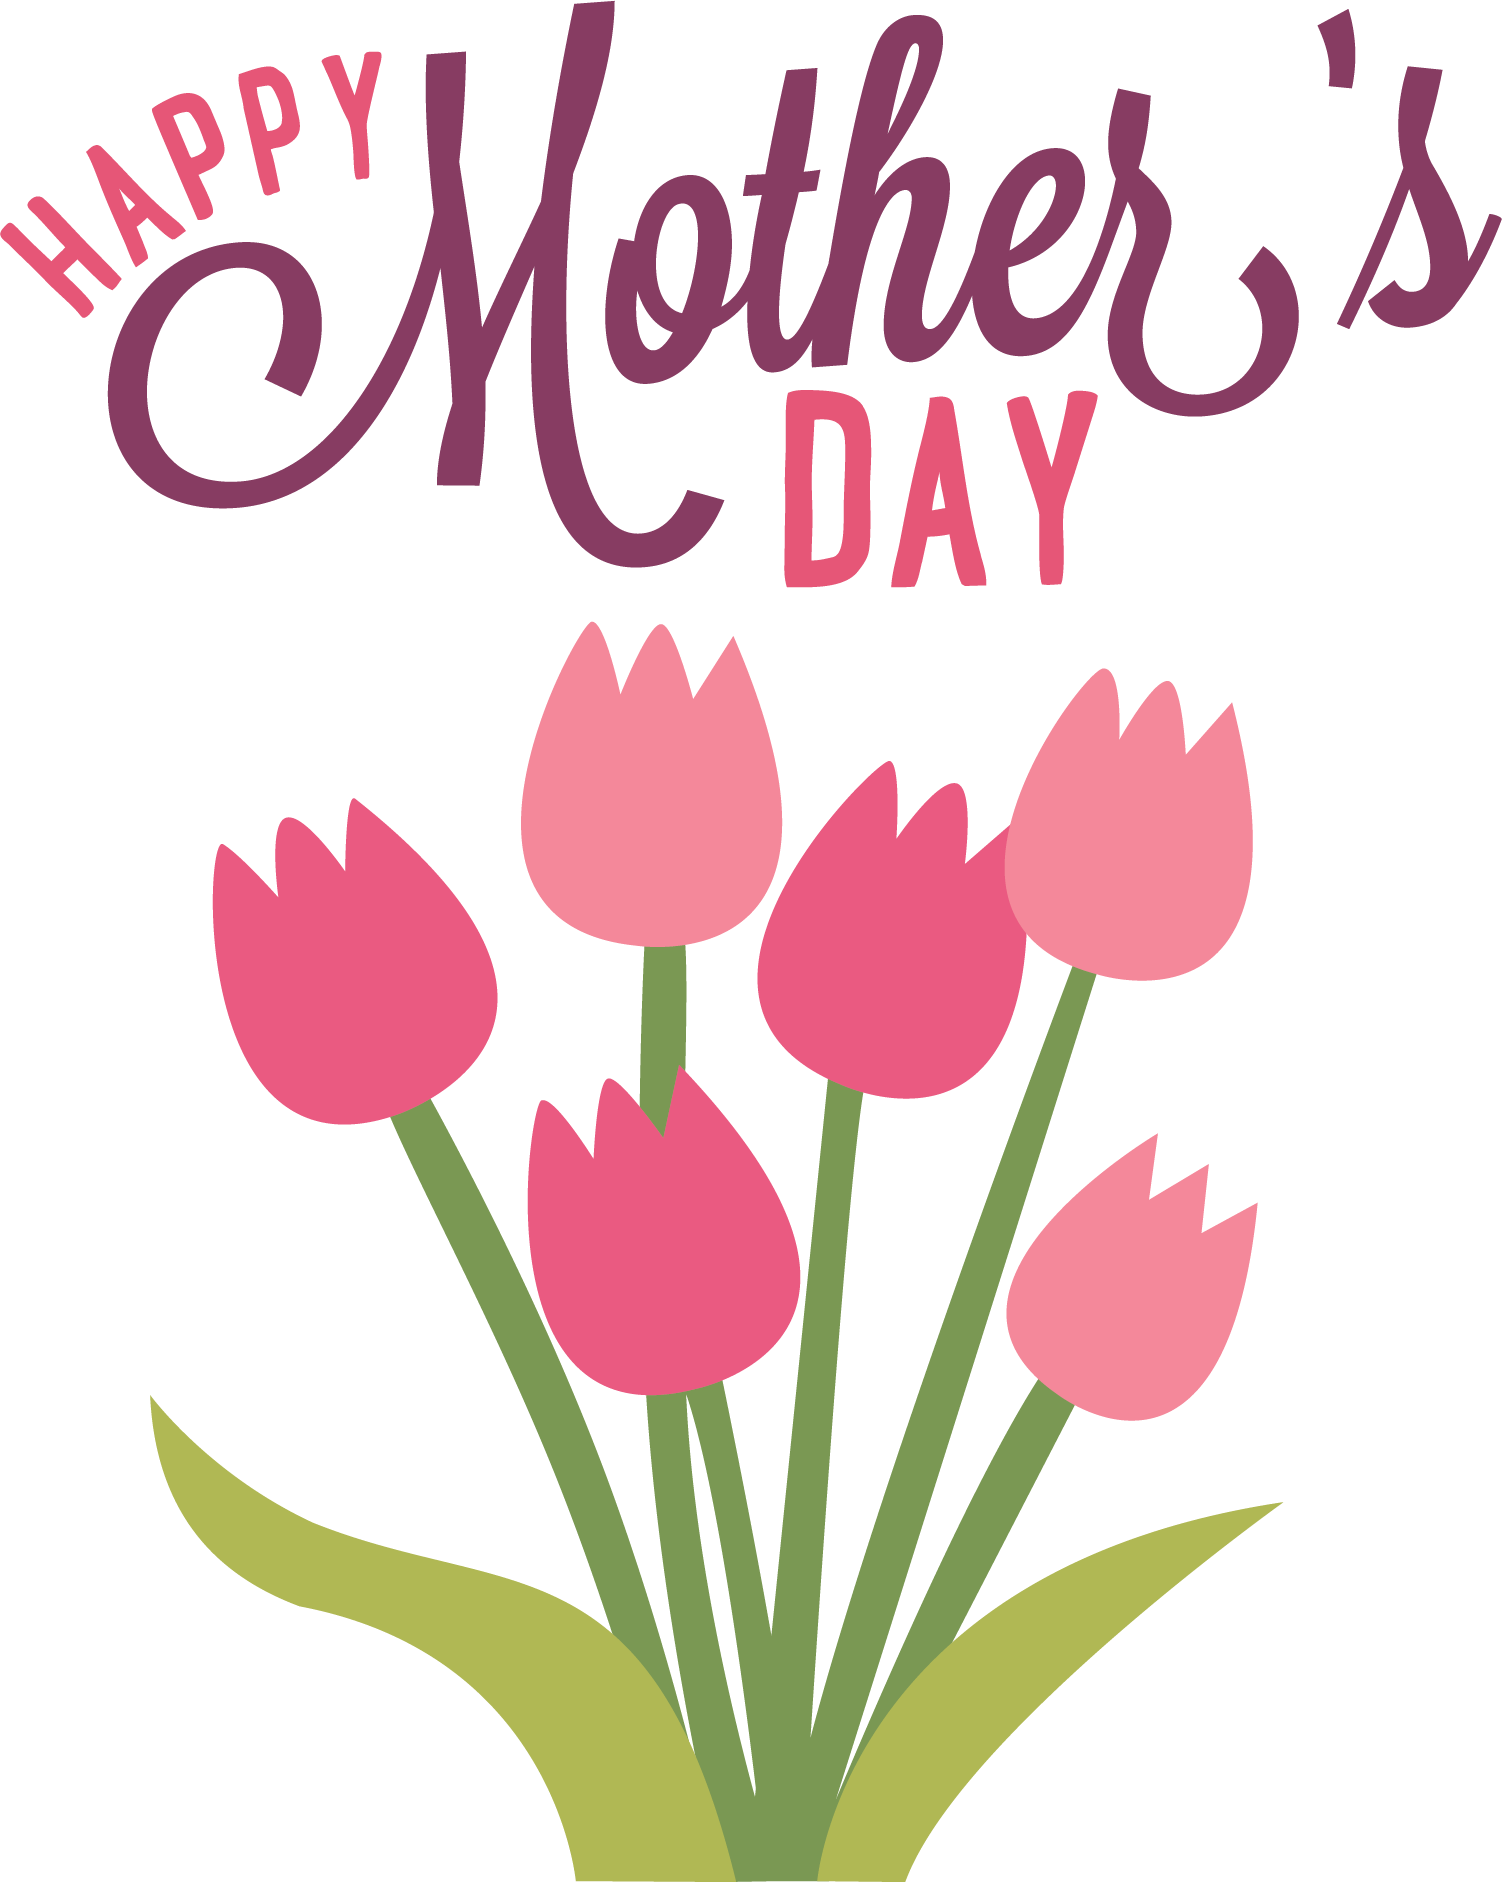 clip art flowers for mother's day - photo #27